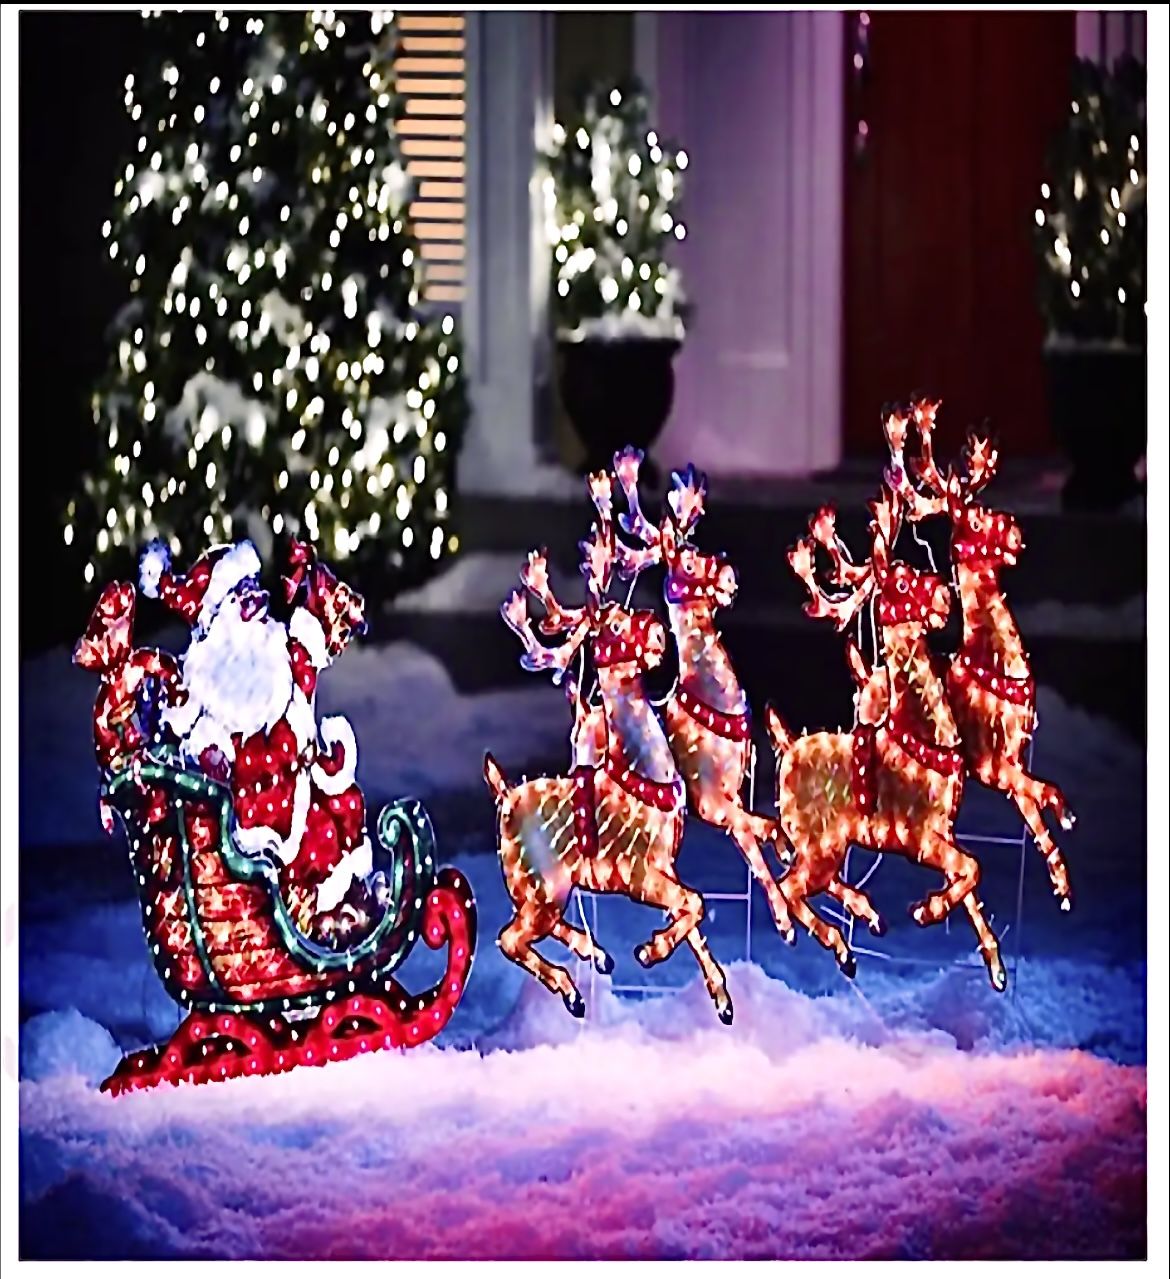 5 Ft long Holographic Santa in Sleigh with 4 Reindeer Outdoor Indoor Holiday Yard Christmas Display Pre Lit